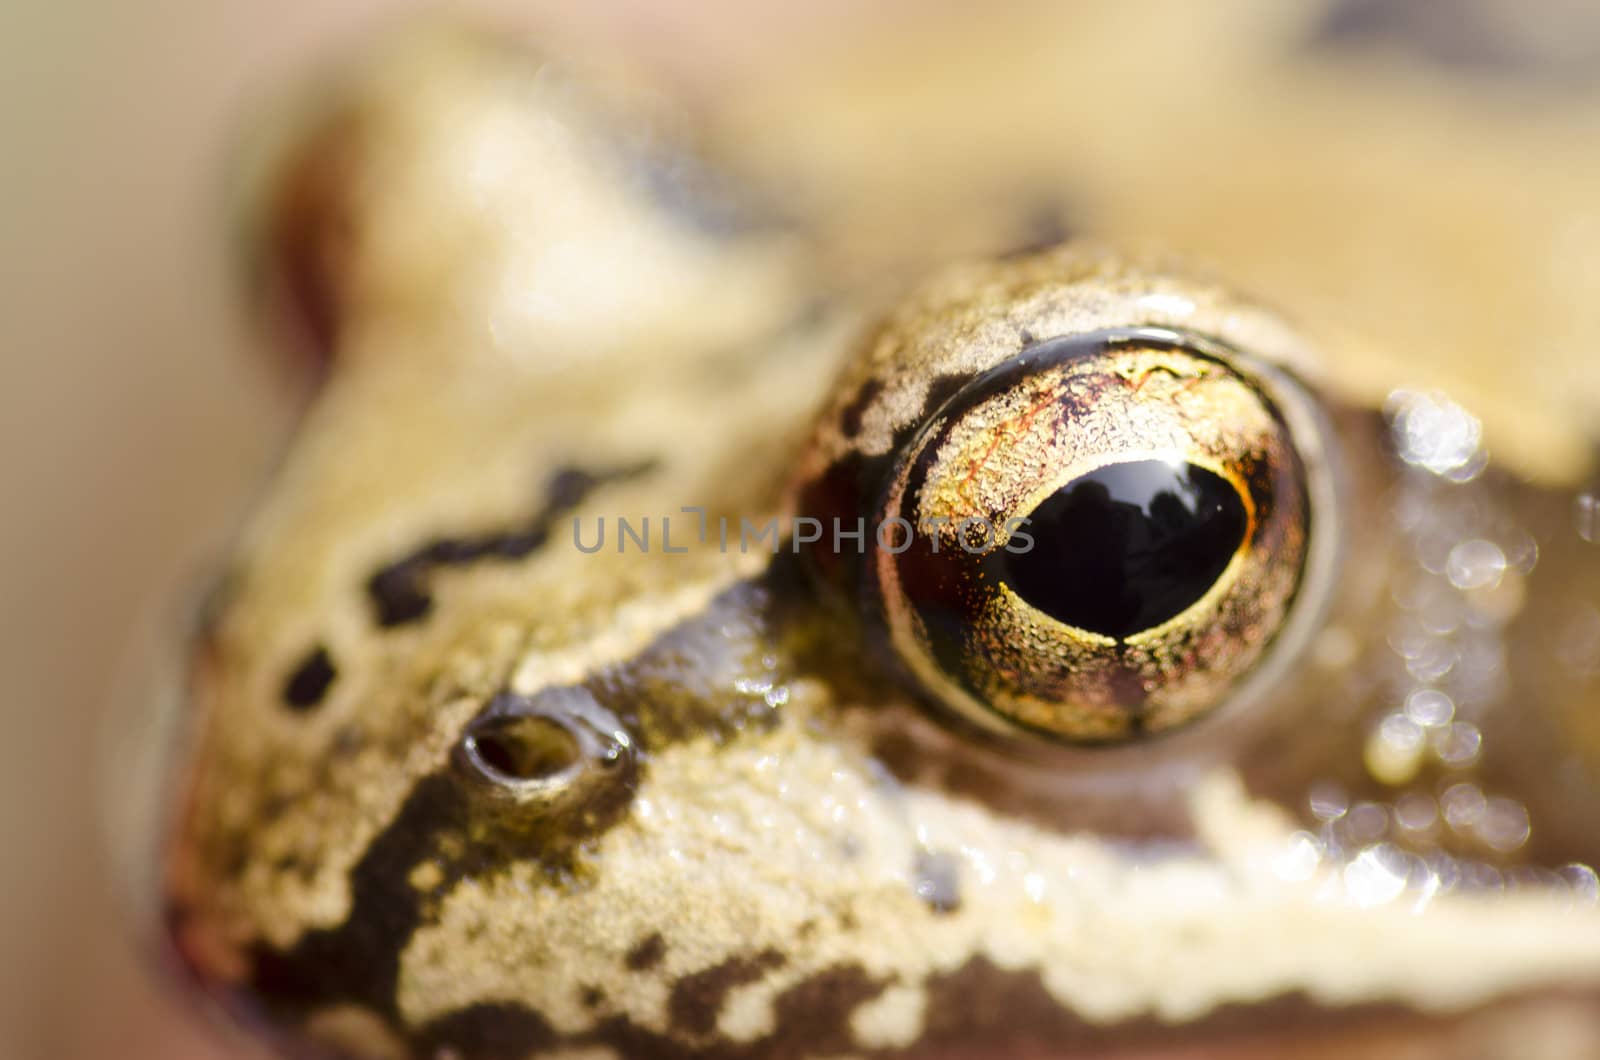 Rana temporaria head with focus on the eye, common frog